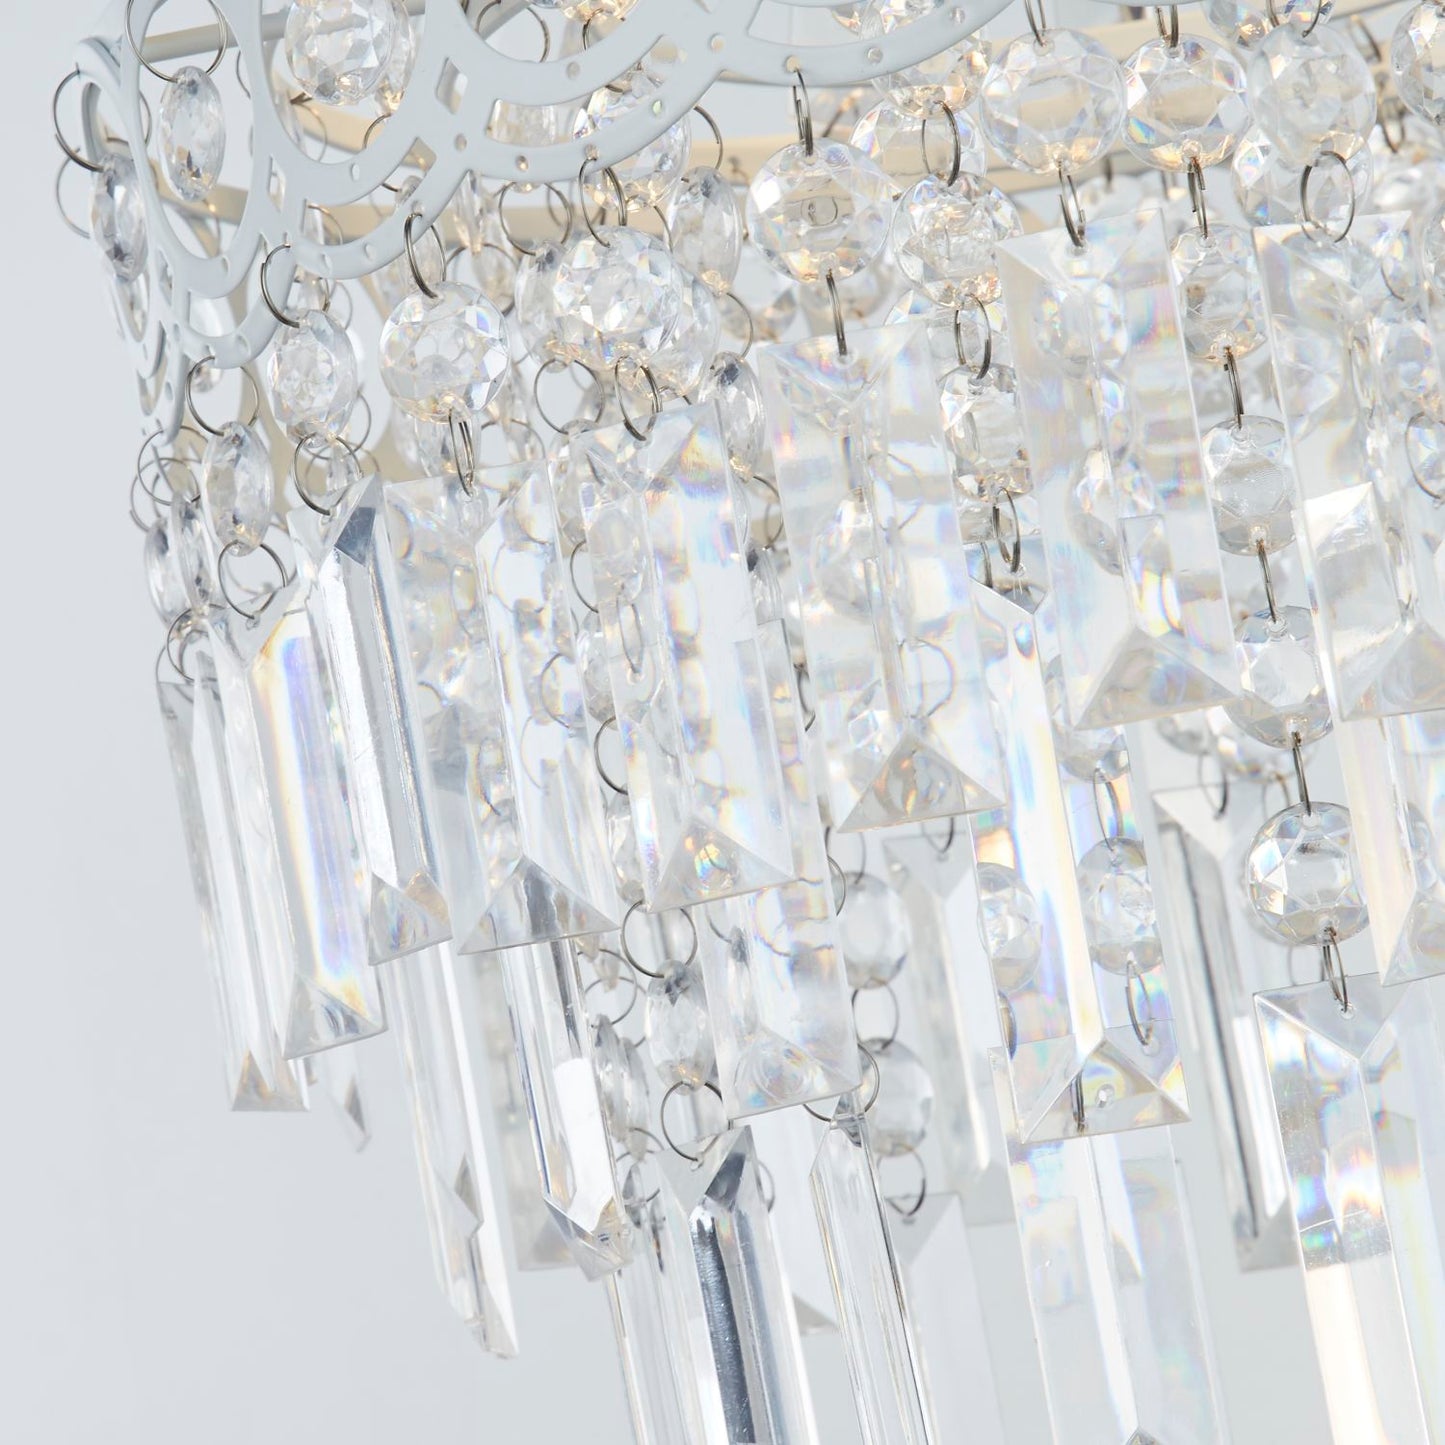 Large Vintage Clear Acrylic Chandelier Light Shade